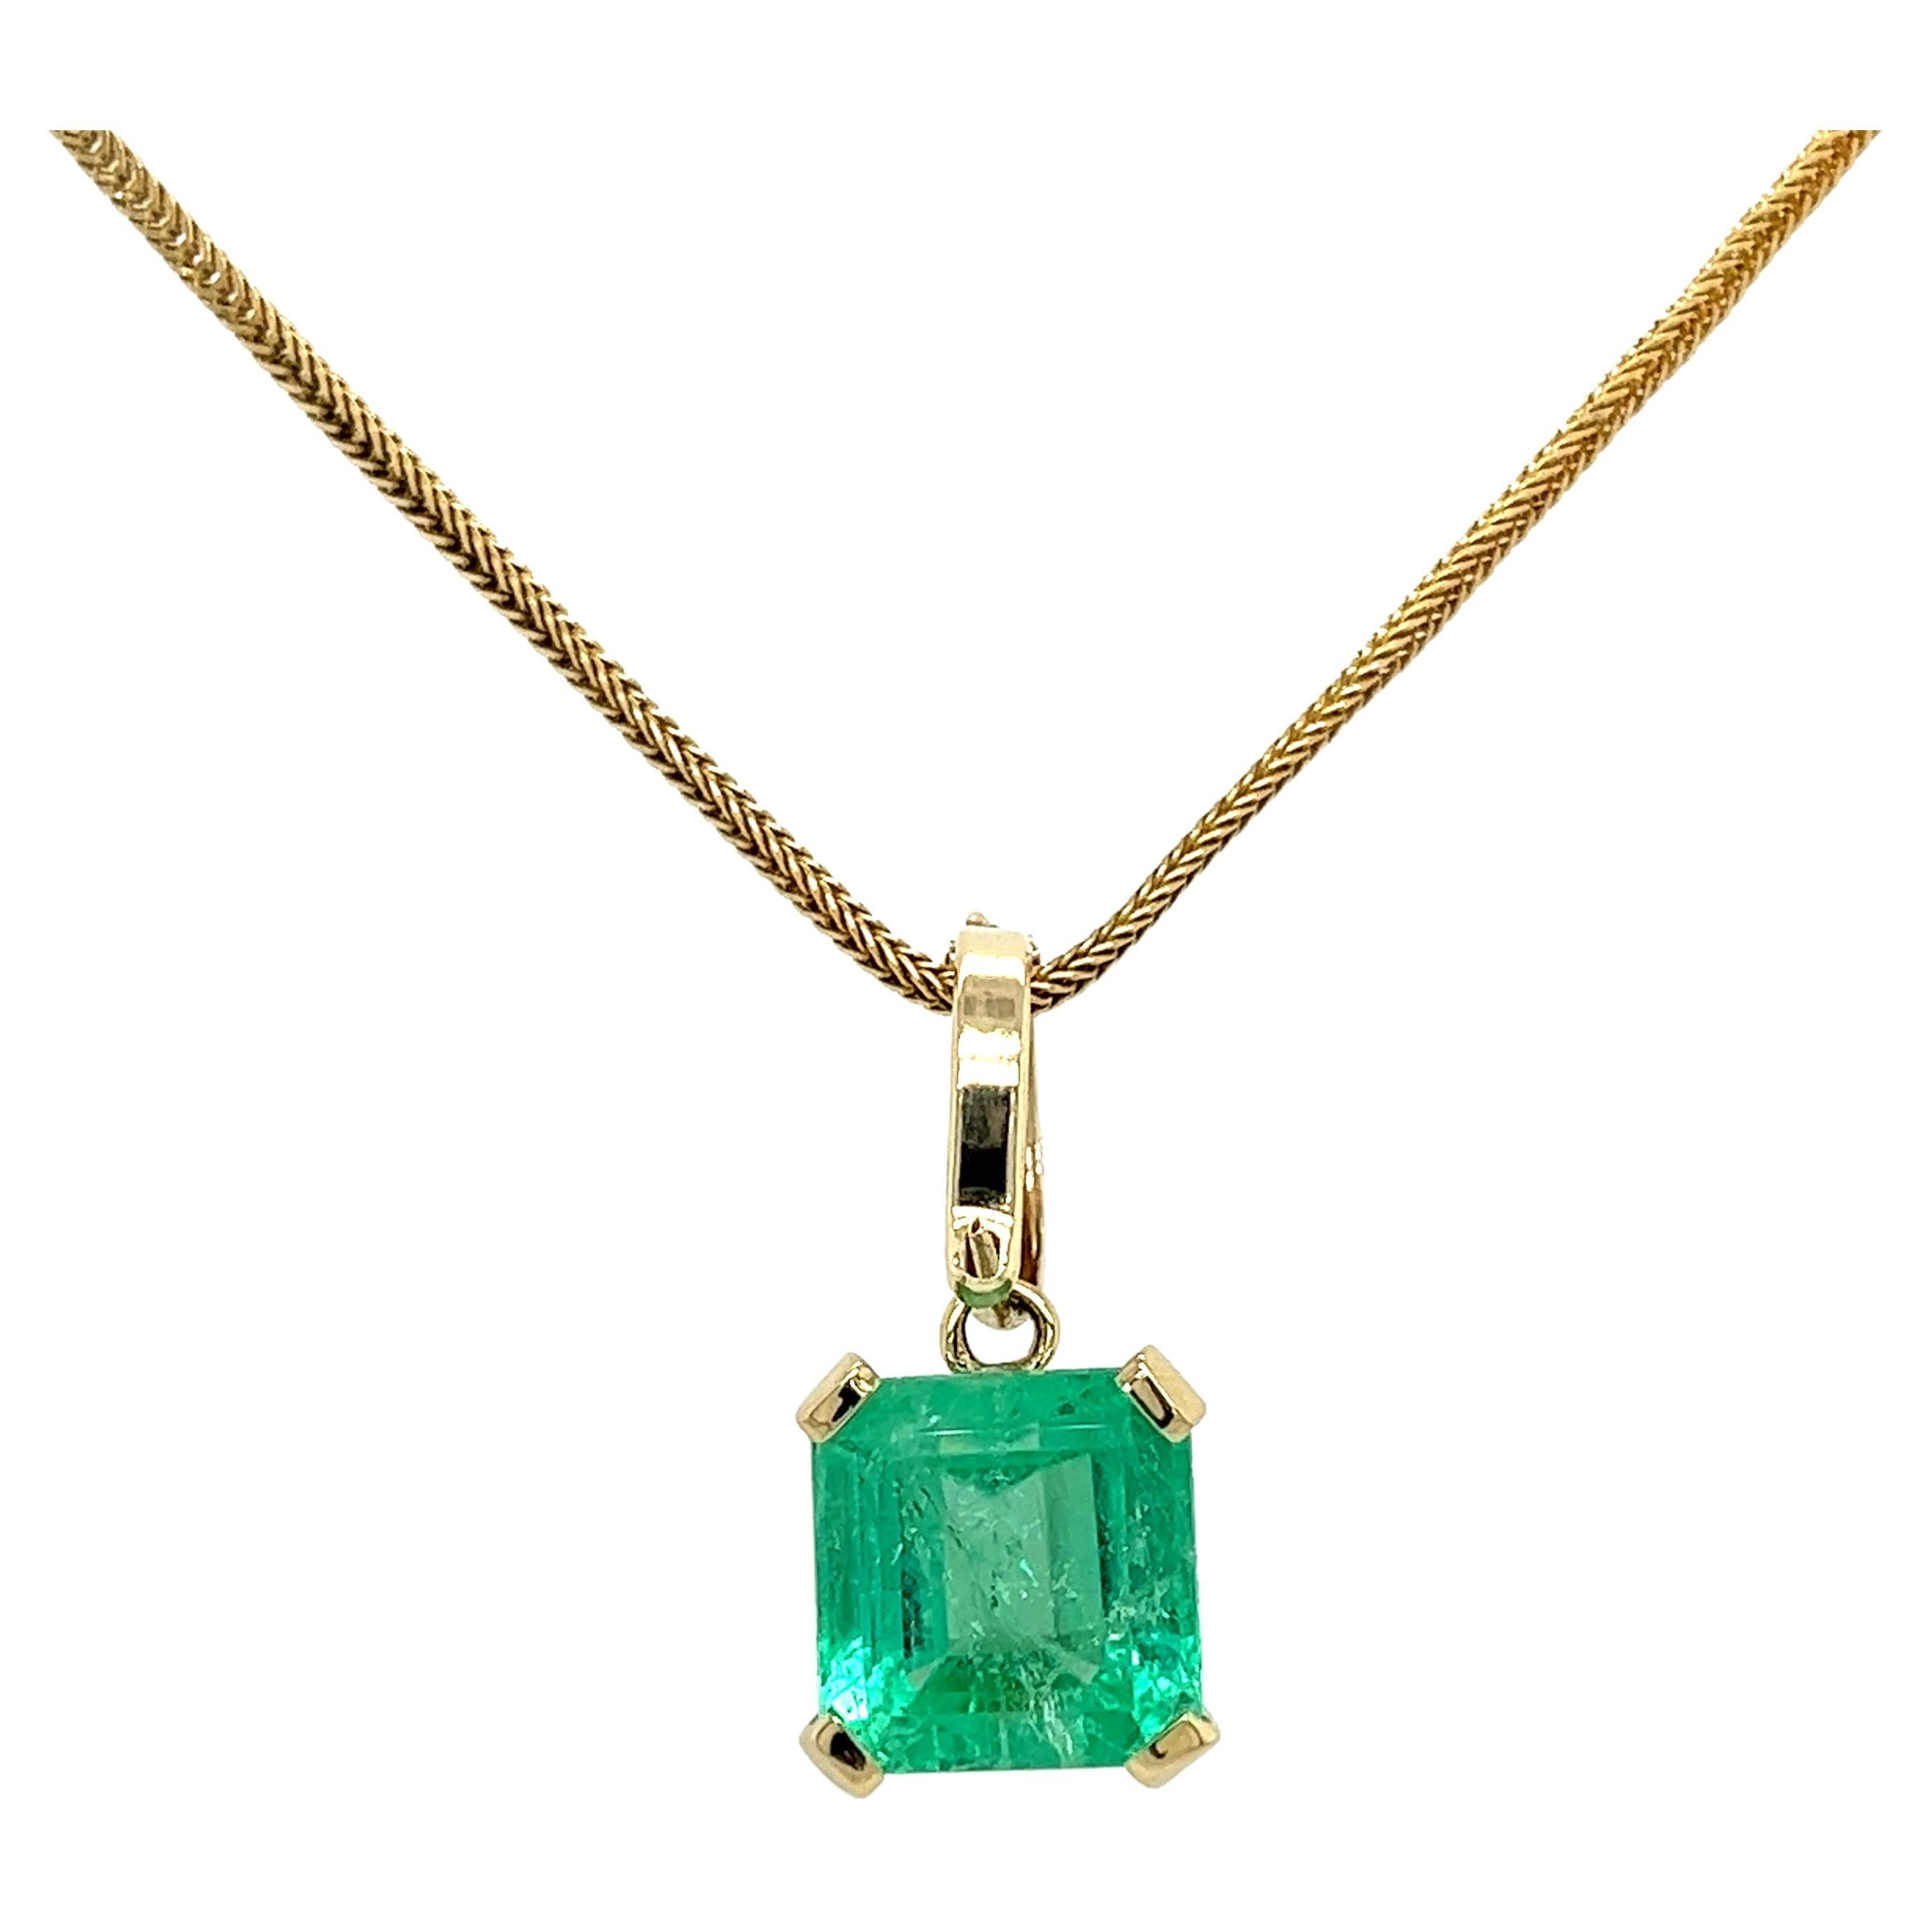 8.34 Carat Colombian Emerald Solitaire Pendant Necklace in 14K Gold For Sale